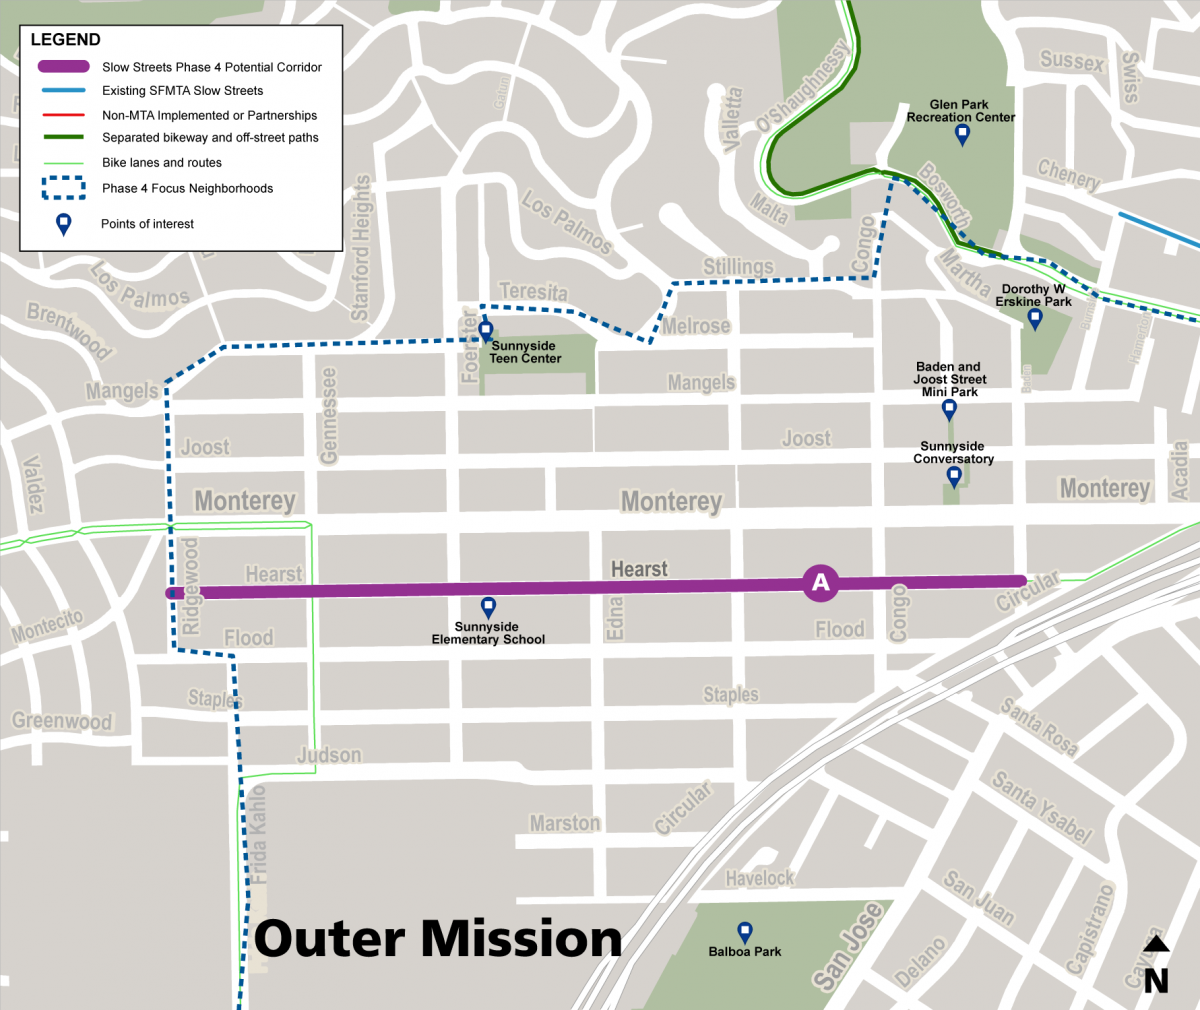 Outer Mission Phase 4 Slow Streets